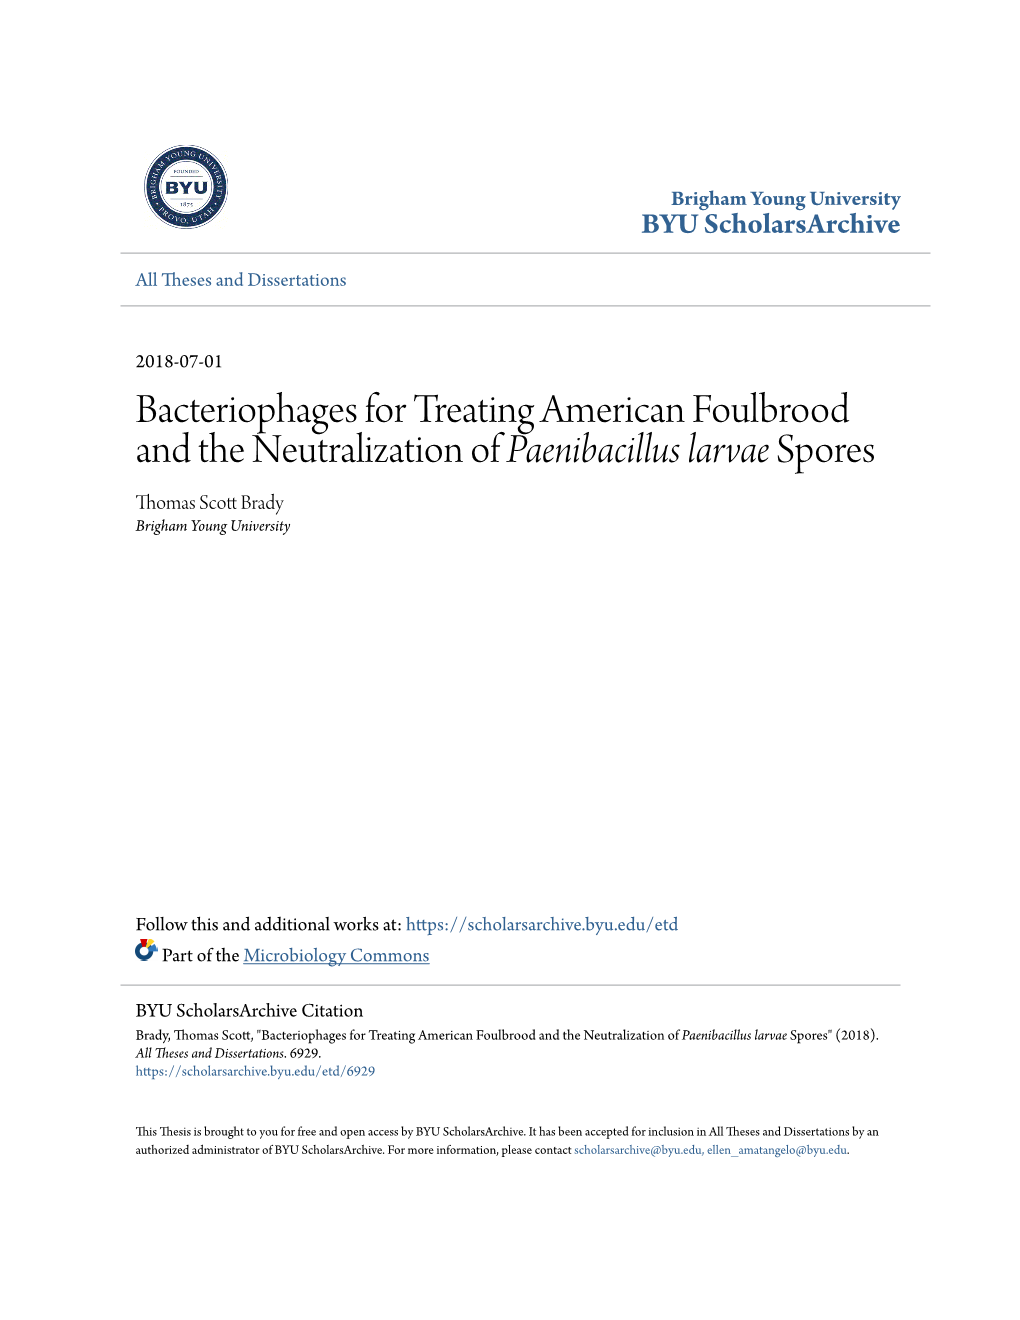 Bacteriophages for Treating American Foulbrood and the Neutralization of Paenibacillus Larvae Spores Thomas Scott Rb Ady Brigham Young University